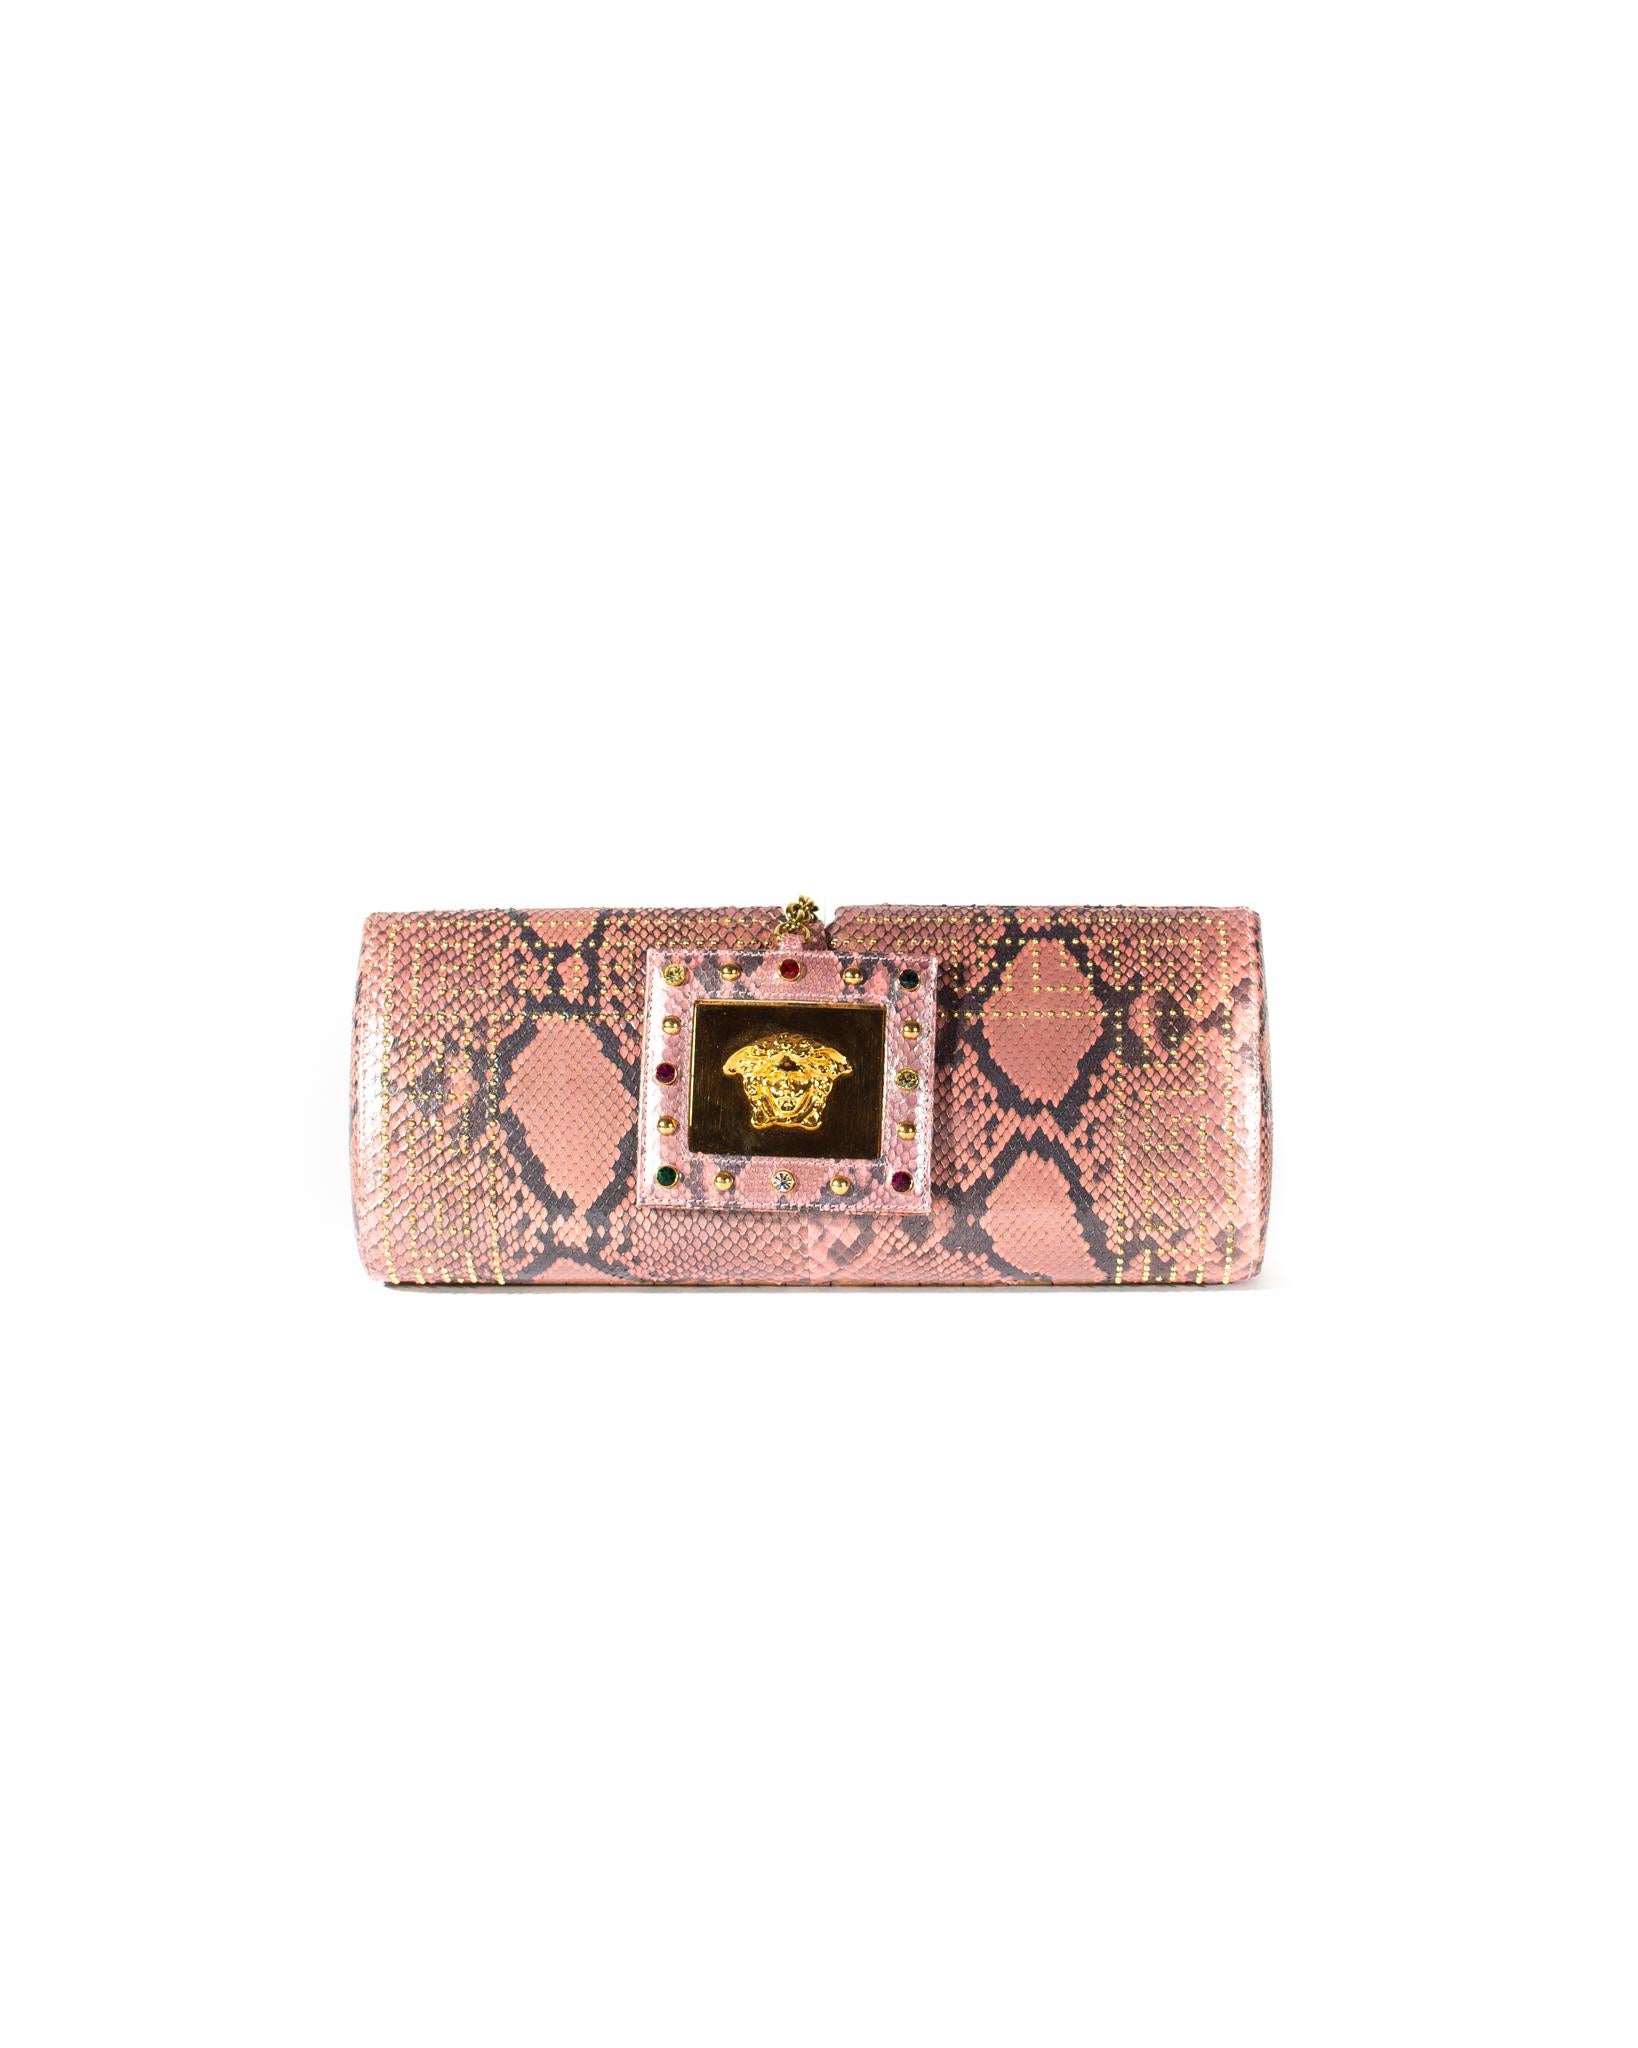 Brown S/S 2000 Gianni Versace Python Pink Convertible Evening Bag & Clutch Donatella For Sale